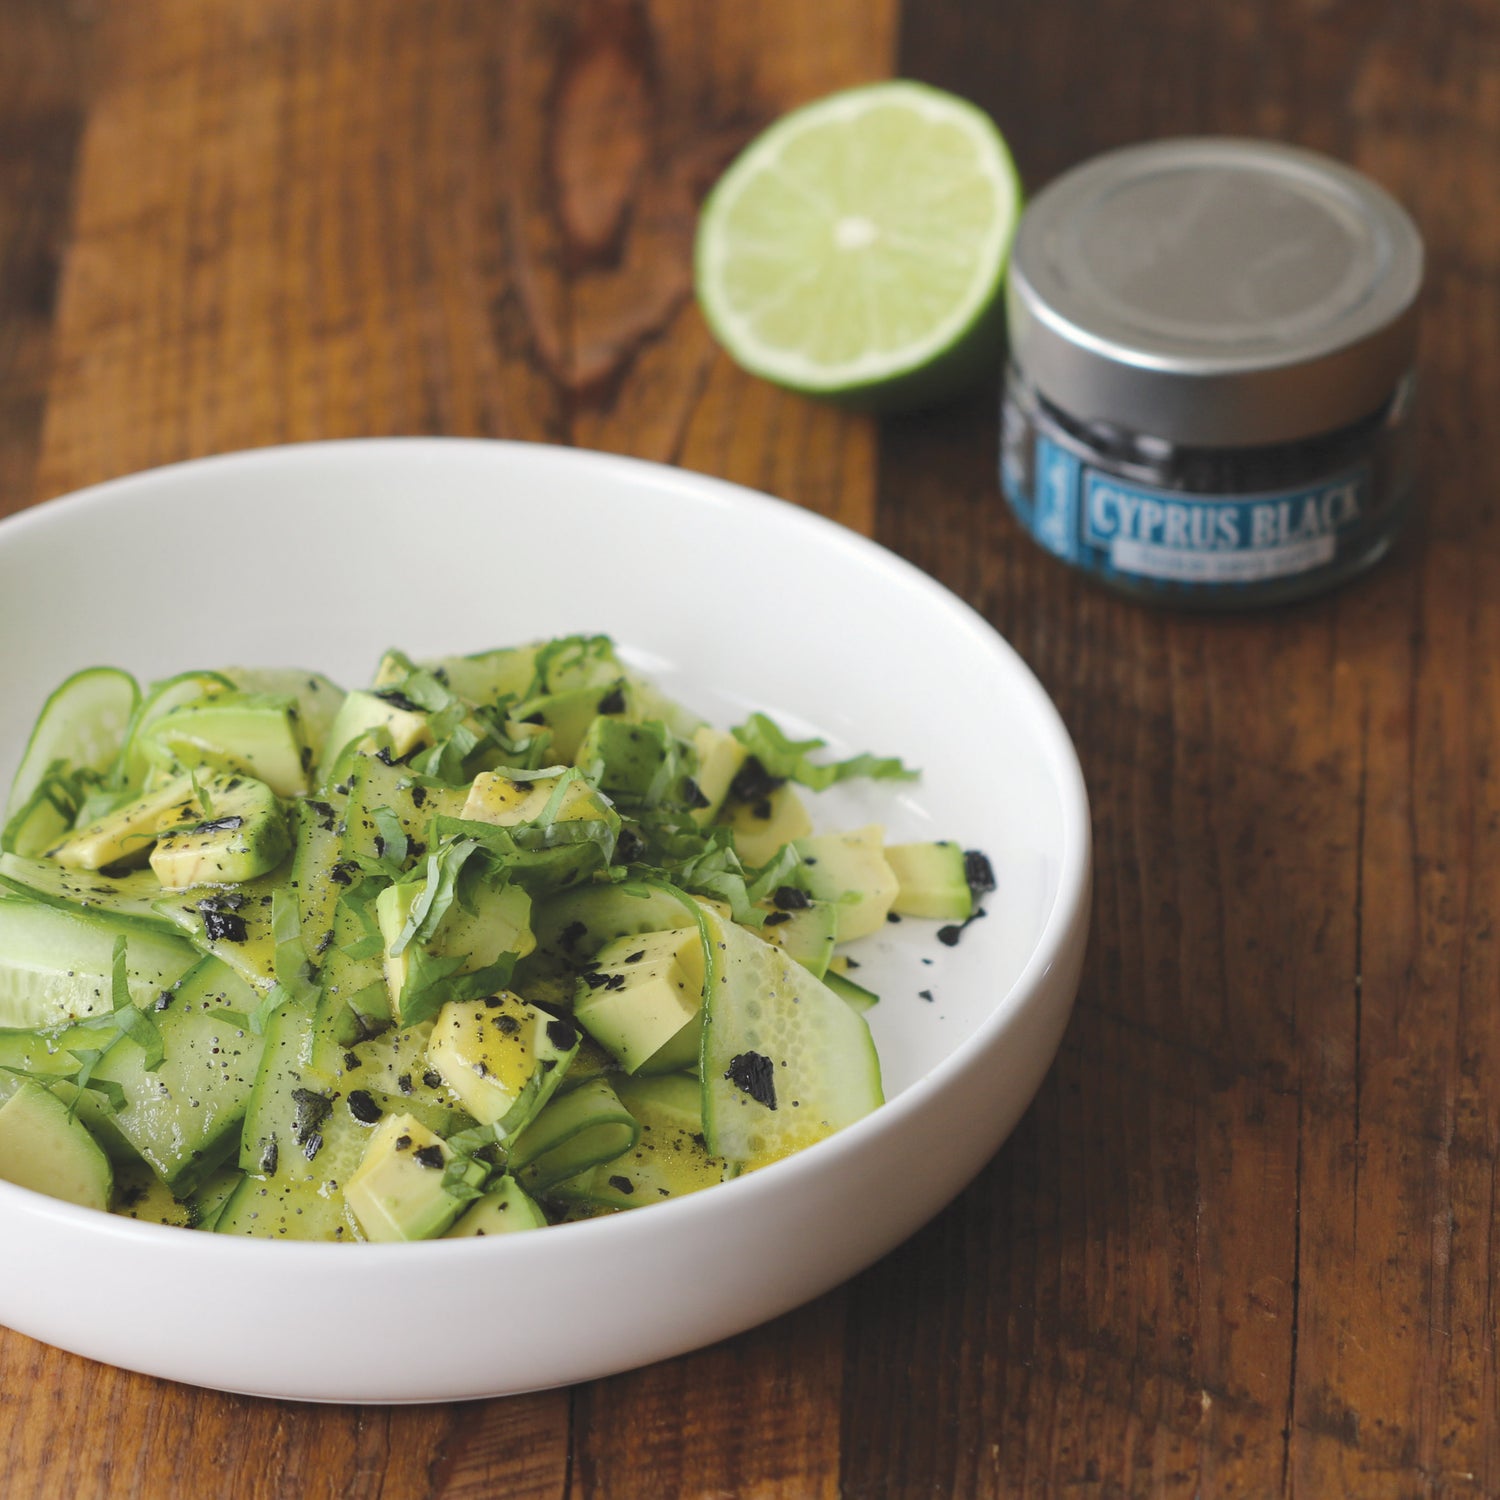 Cucumber & Avocado Salad with Tequila Poppy Seed Vinaigrette